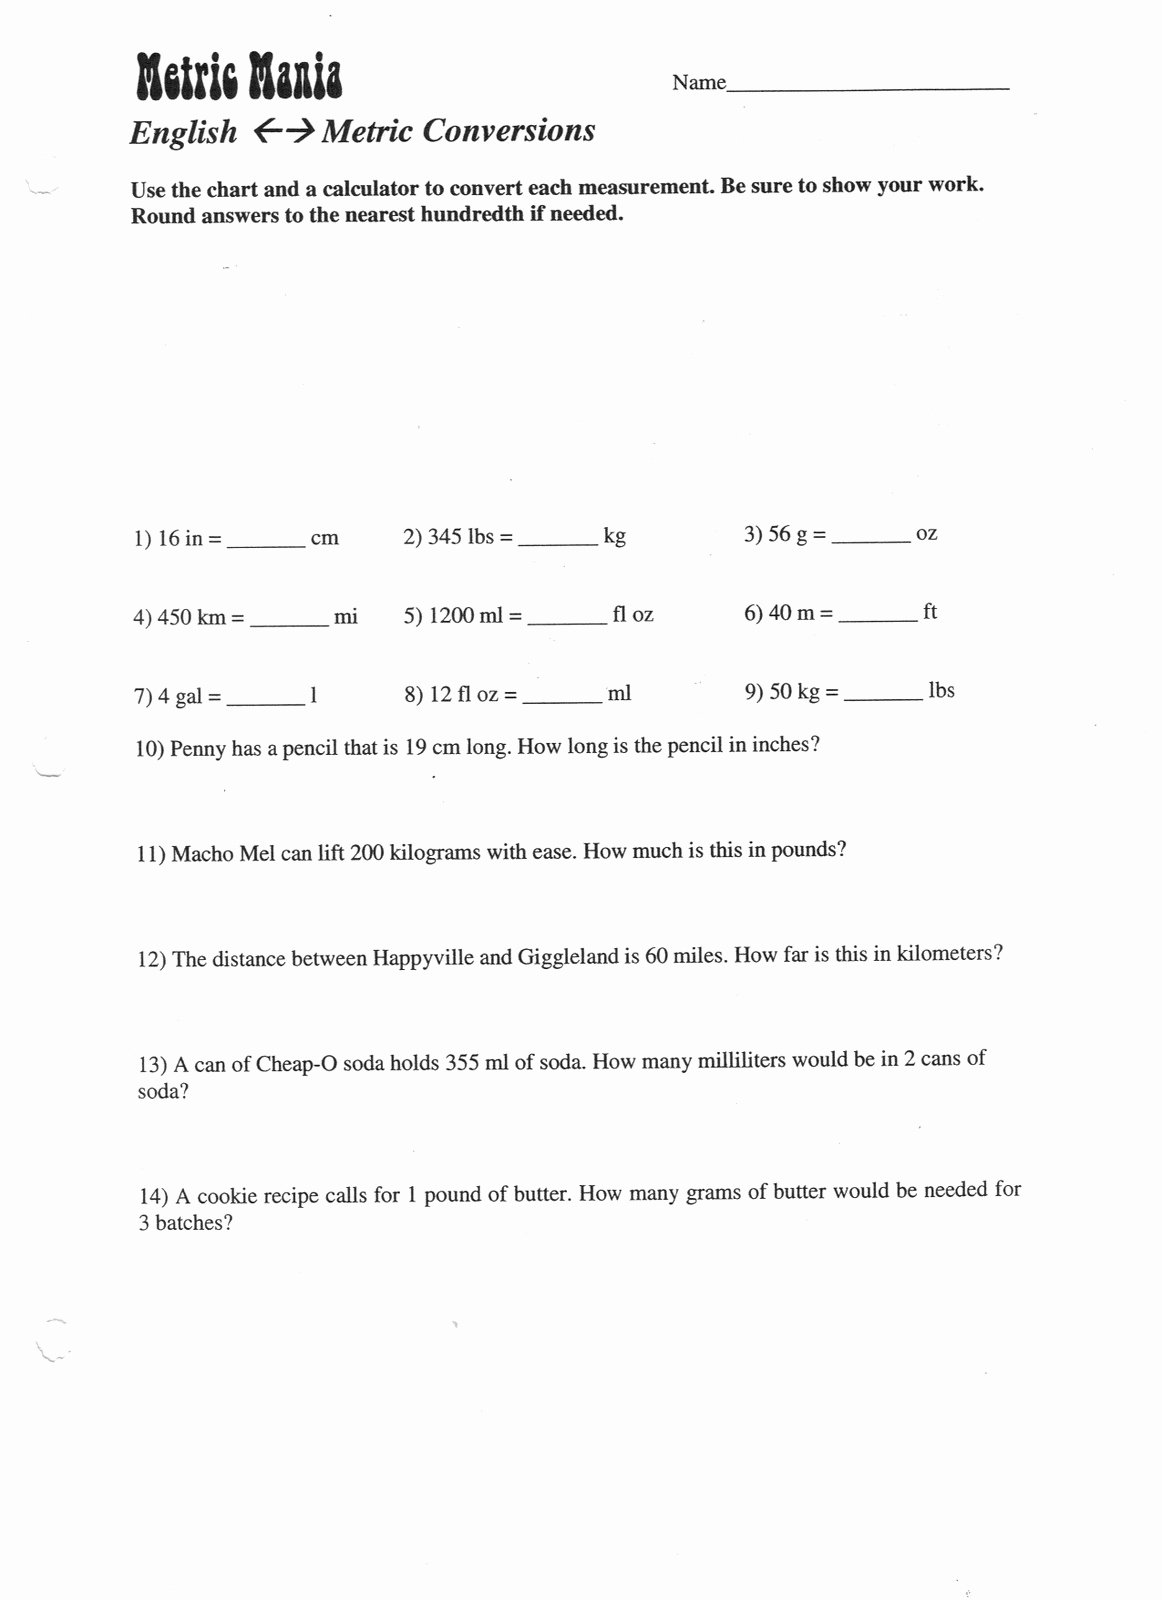 English to Metric Conversion Worksheet Inspirational Ms Friedman S Foundations Of Science Metric English